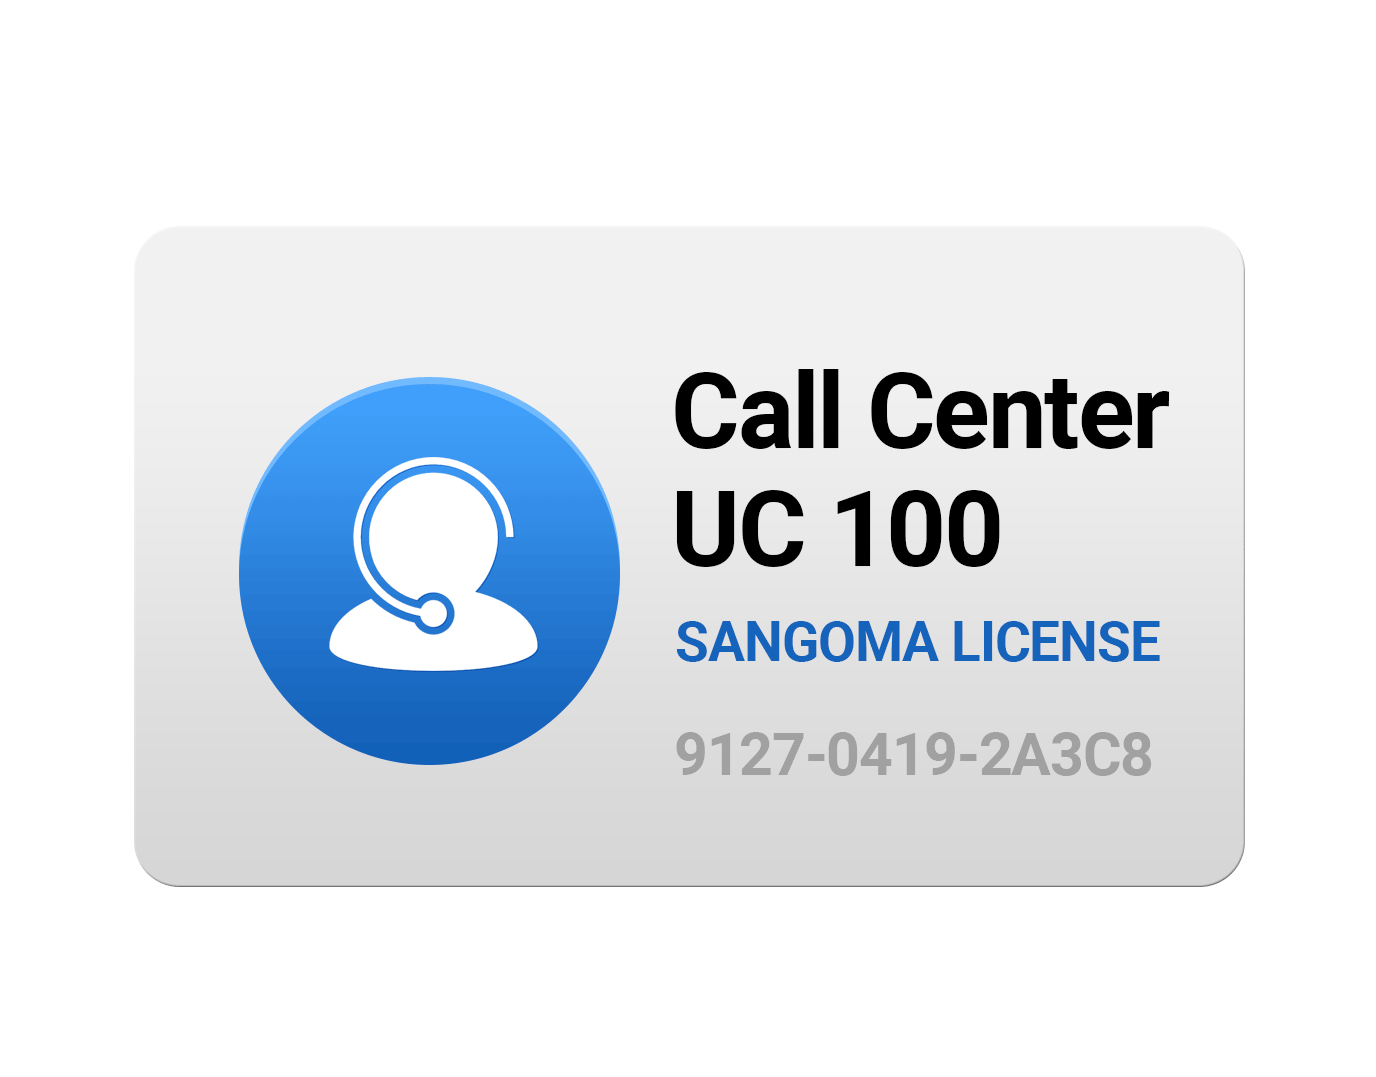 Call Center Features License for UC 100